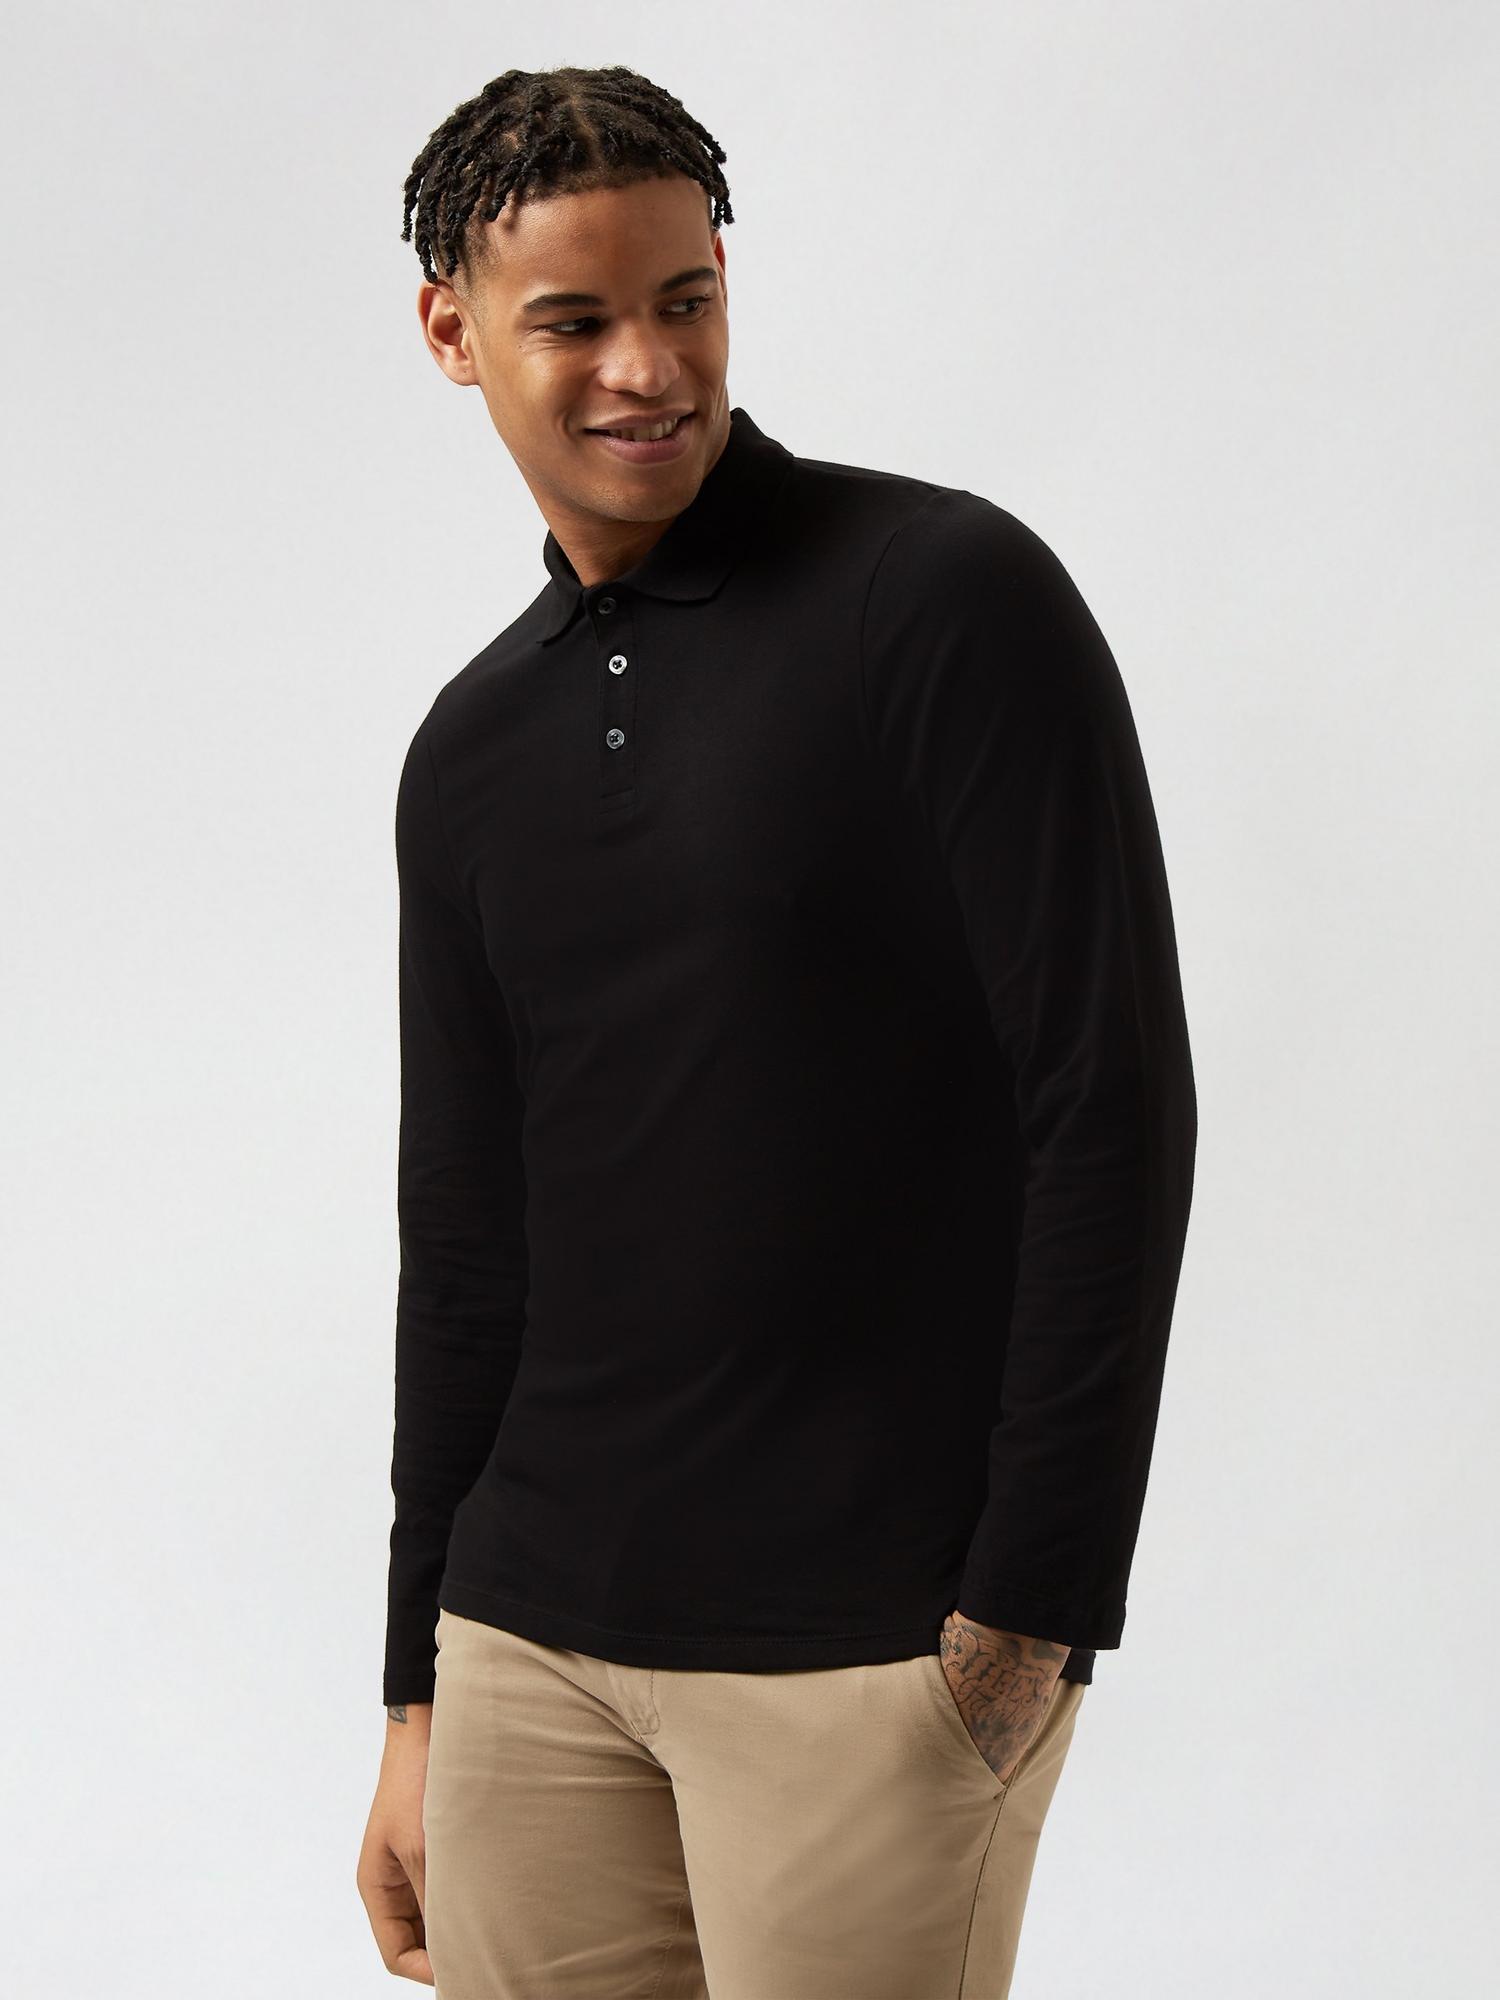 2 Pack Black and Khaki Long Sleeve Muscle Fit Polo | Burton UK